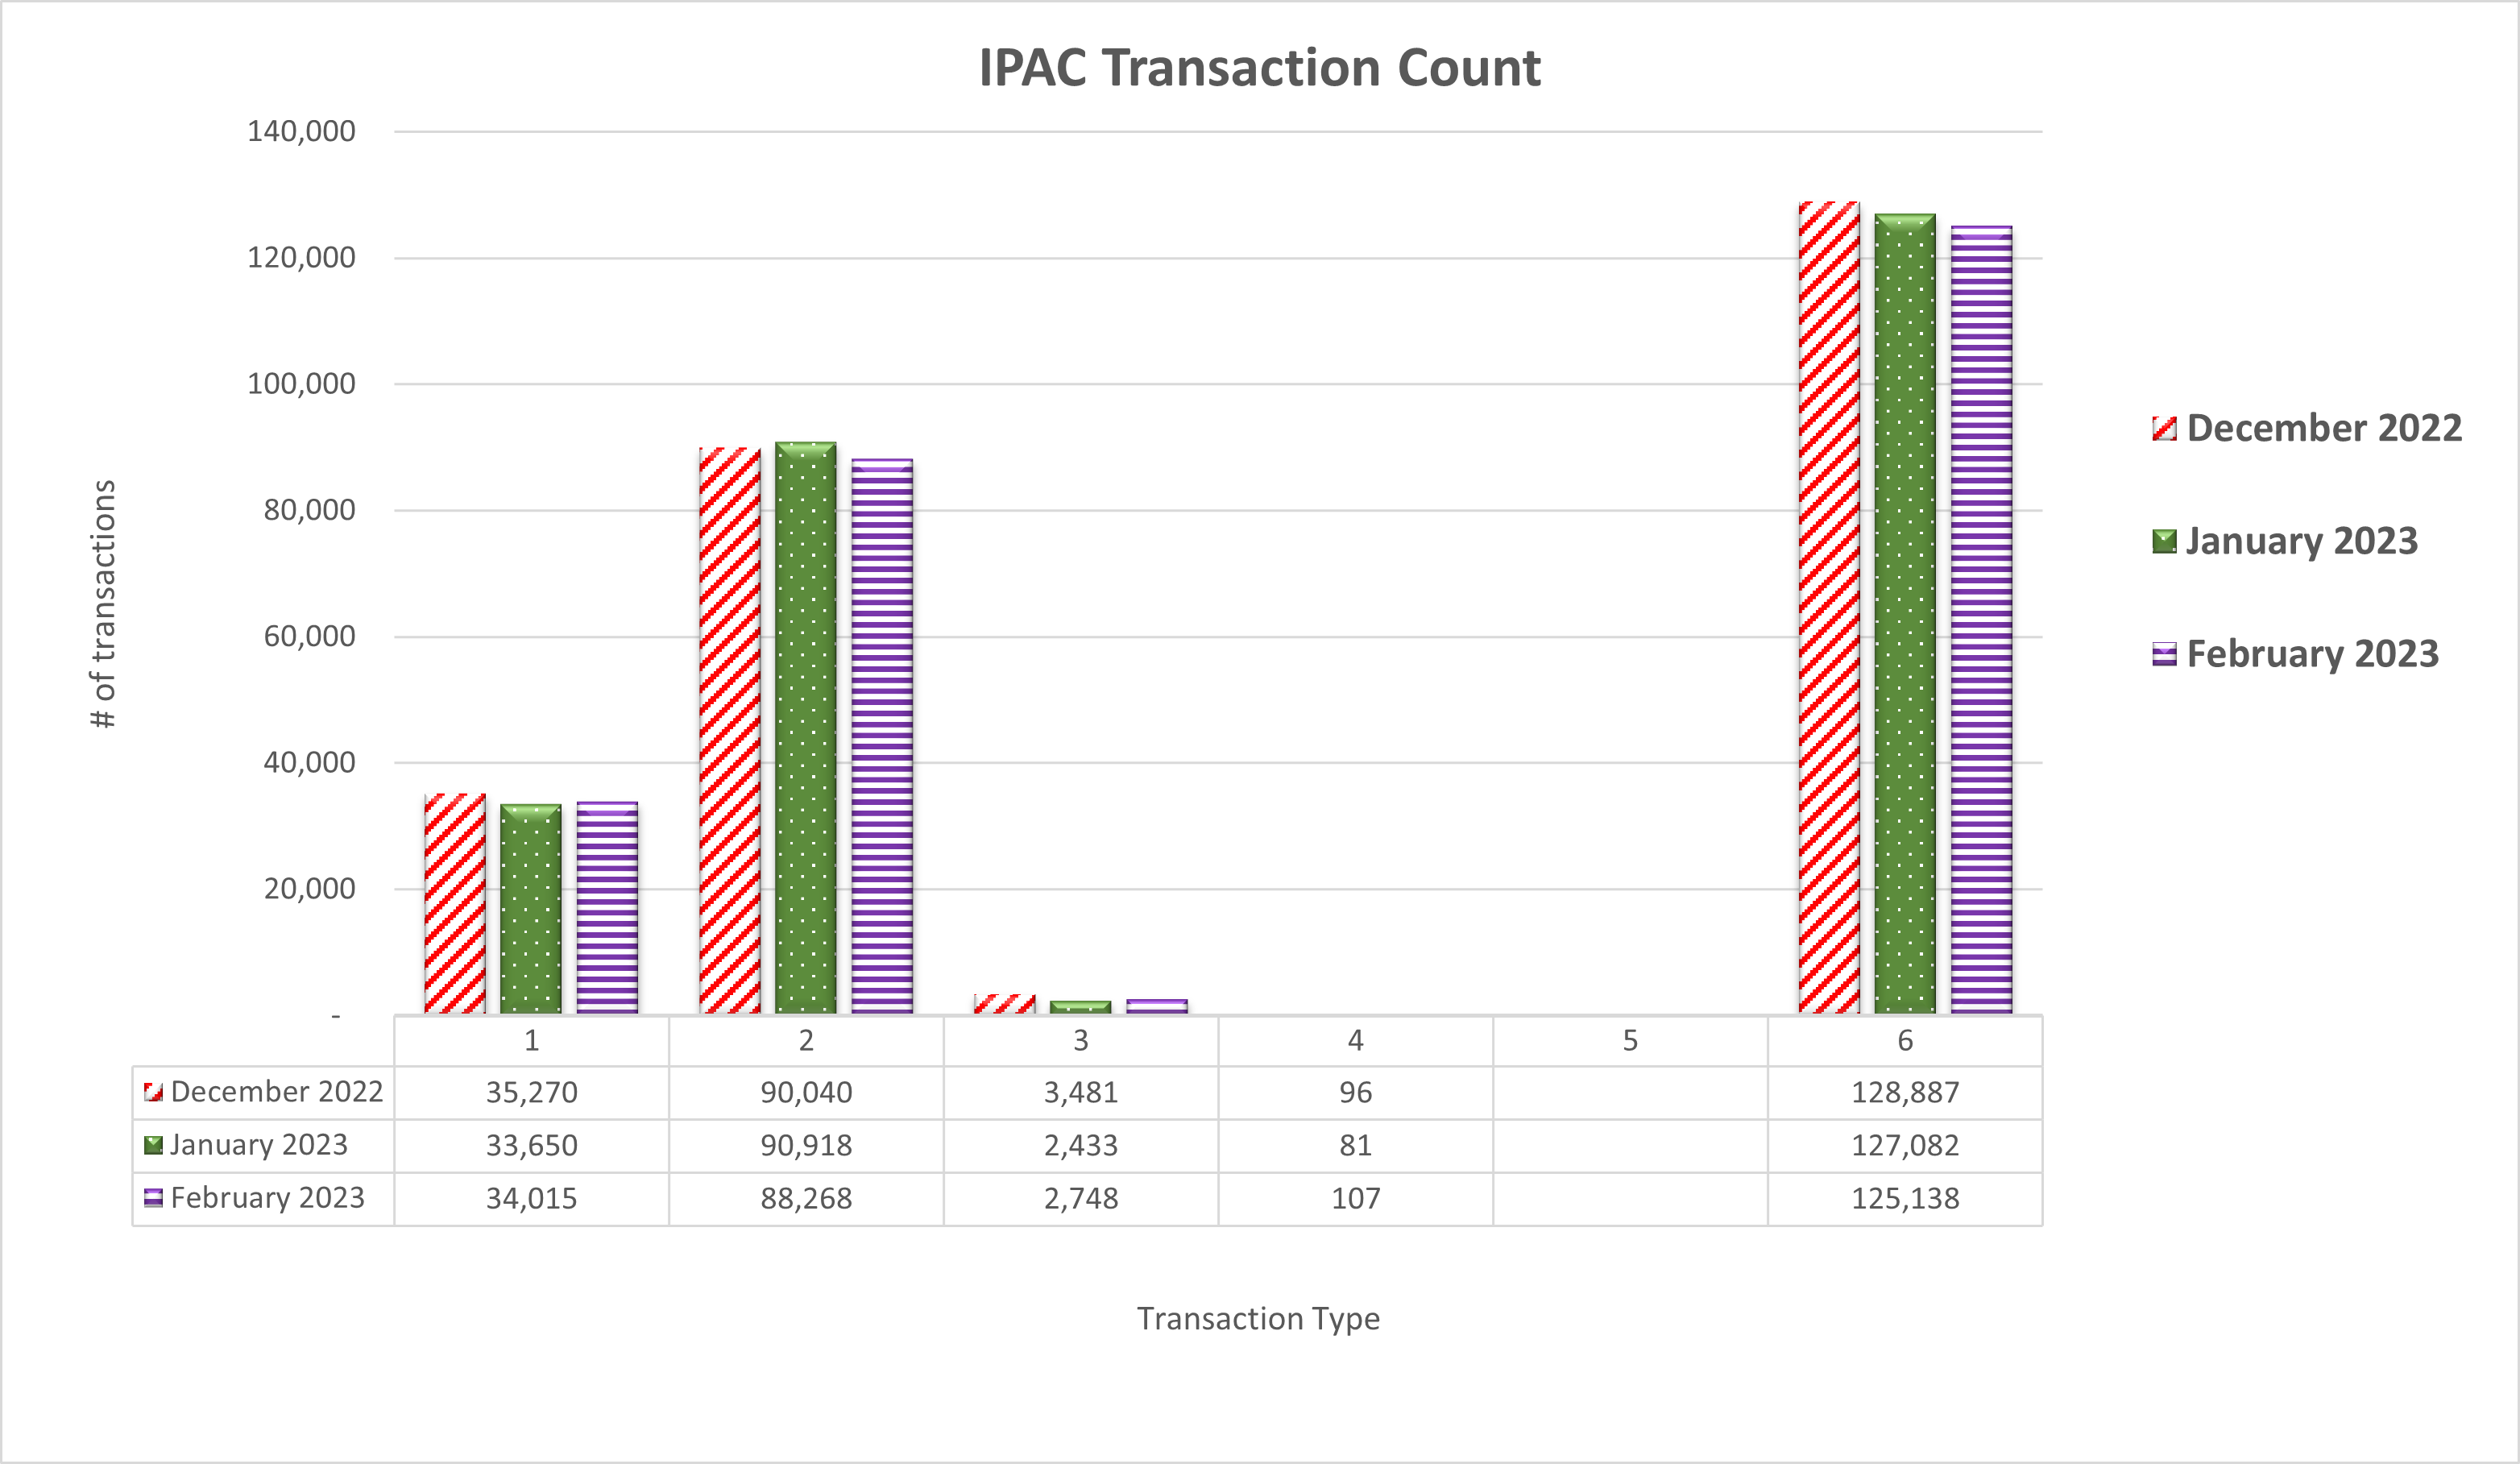 IPAC Transaction Count January 2022 through February 2023